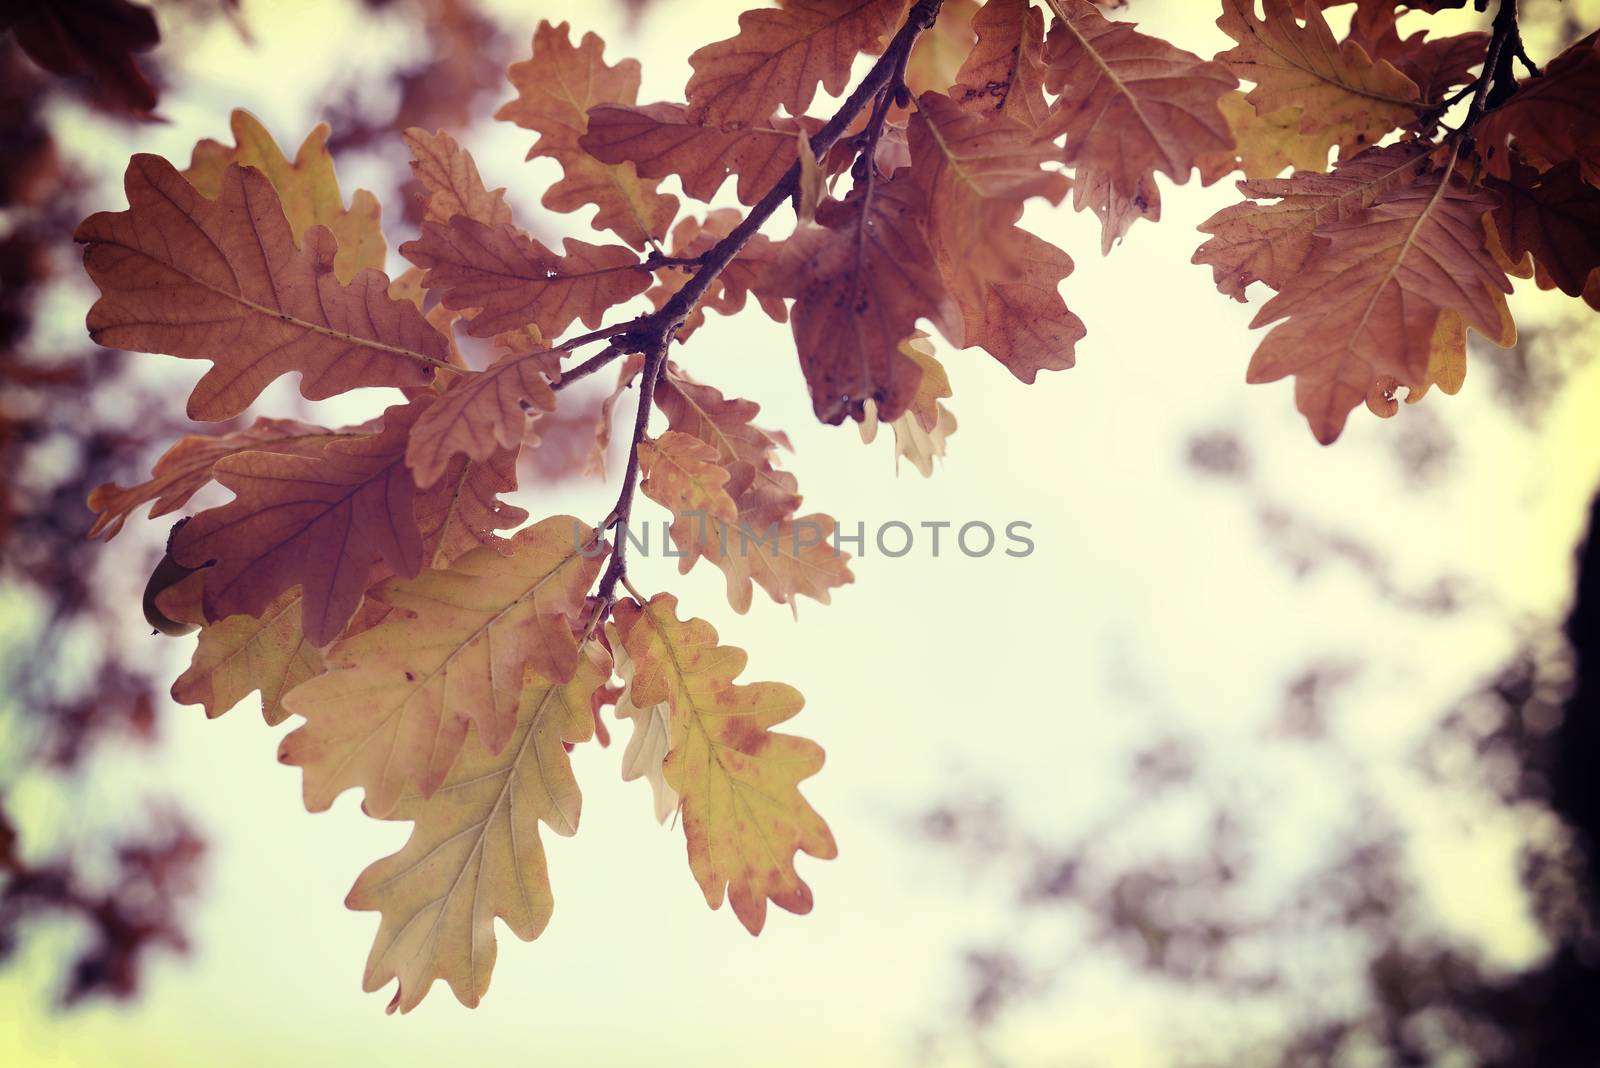 Fall season oak autumn tree leaves close up in sunset background with vintage style filter.